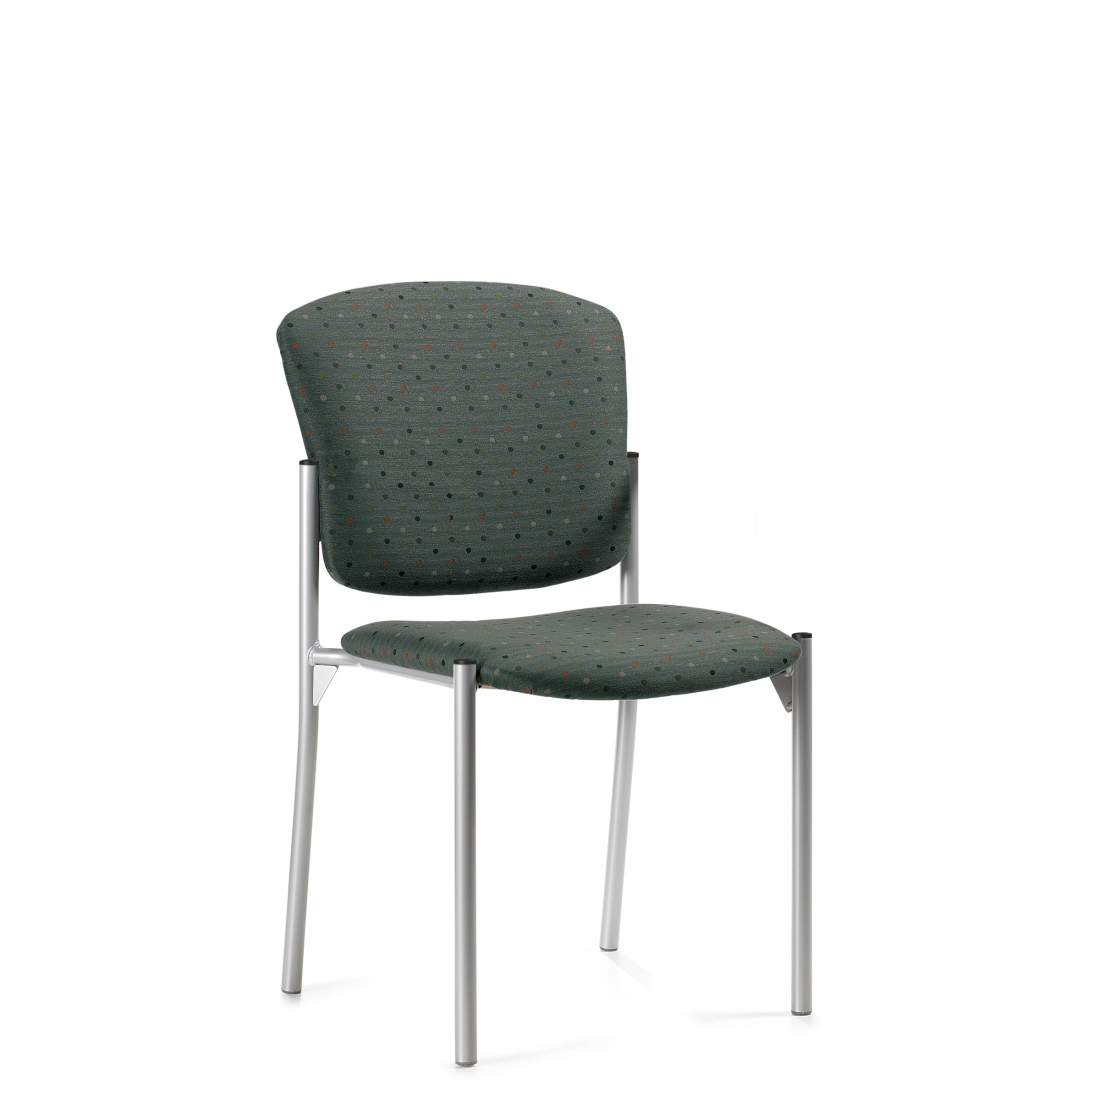 Fan Back Stacking Chair, Armless